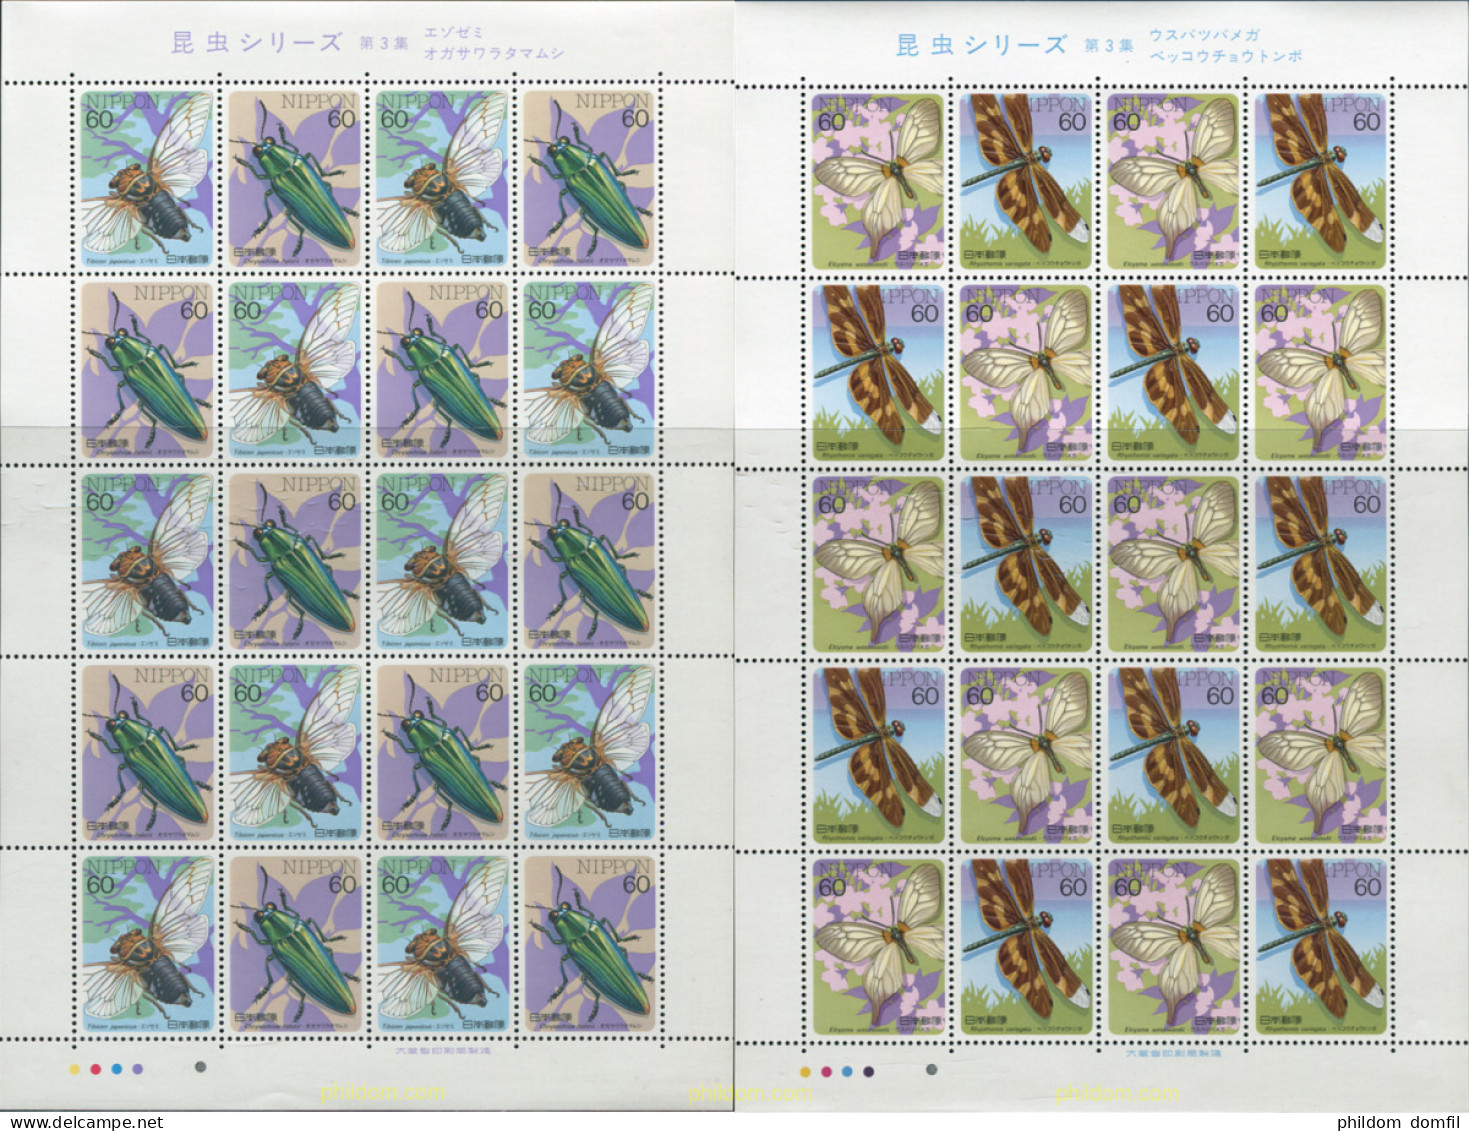 337331 MNH JAPON 1986 INSECTOS - Nuovi